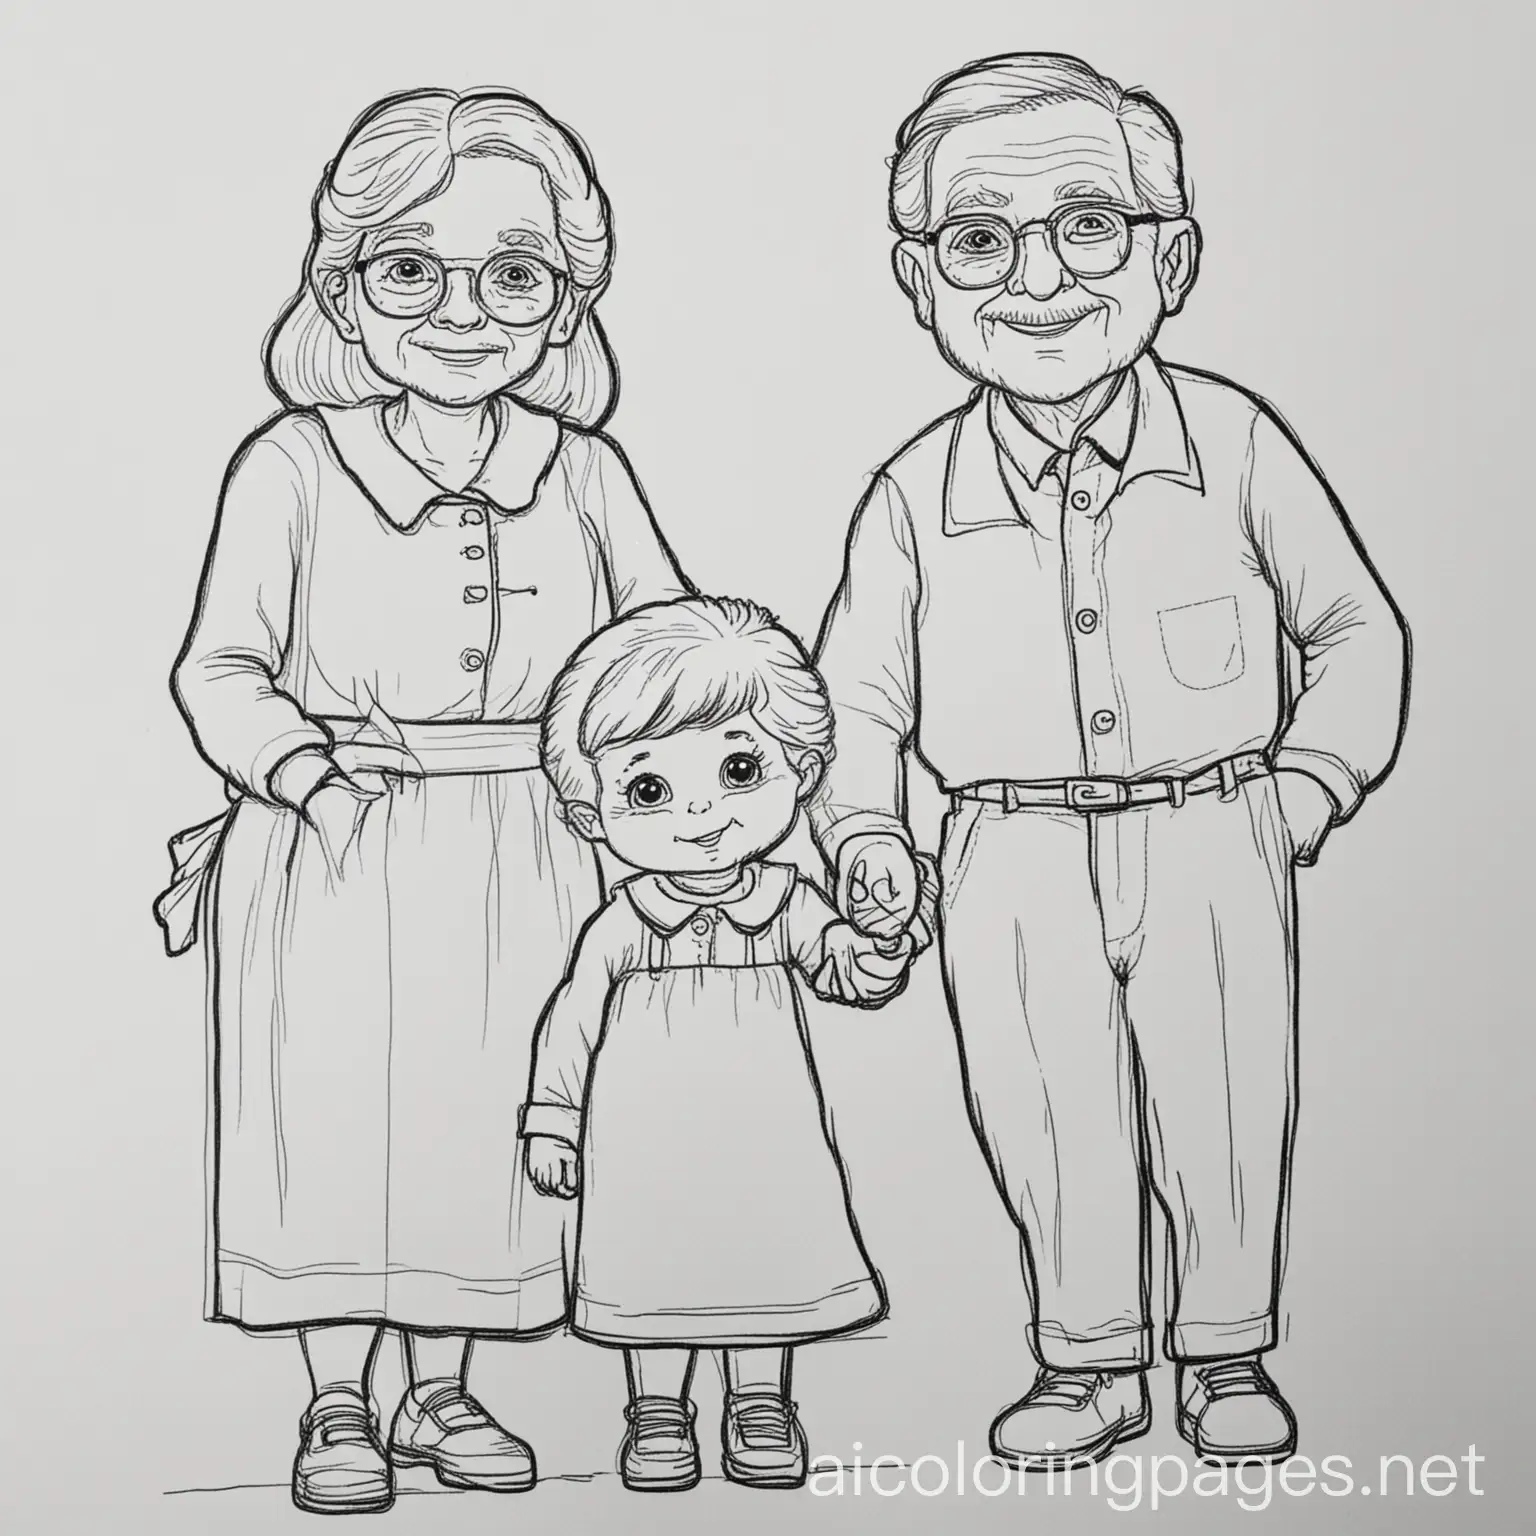 Grandparents-and-Grandchildren-Coloring-Page-Simple-Line-Art-for-Kids